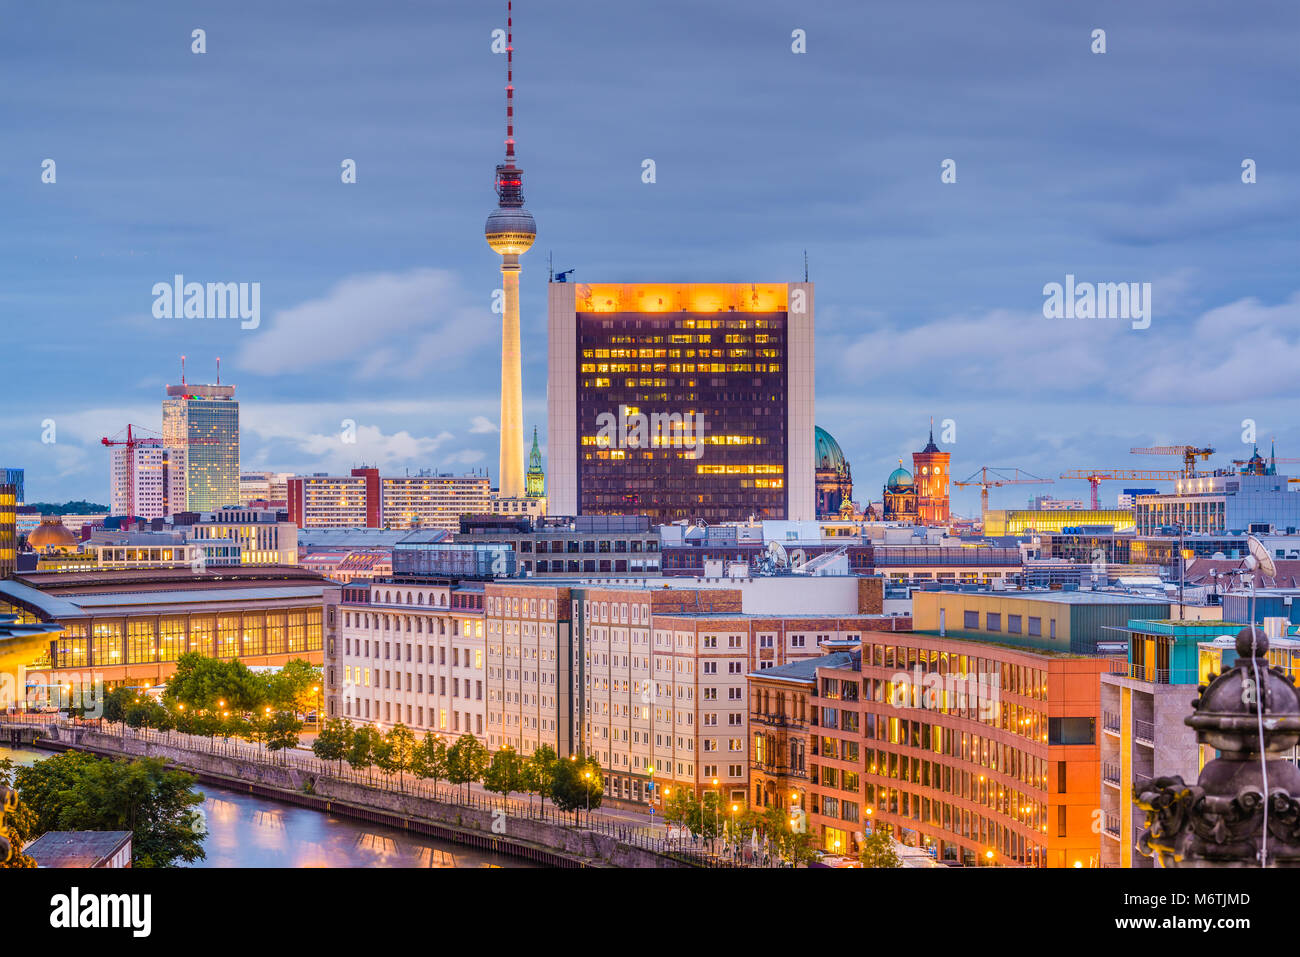 Berlin, Germany city skyline and tower at dusk. Stock Photo